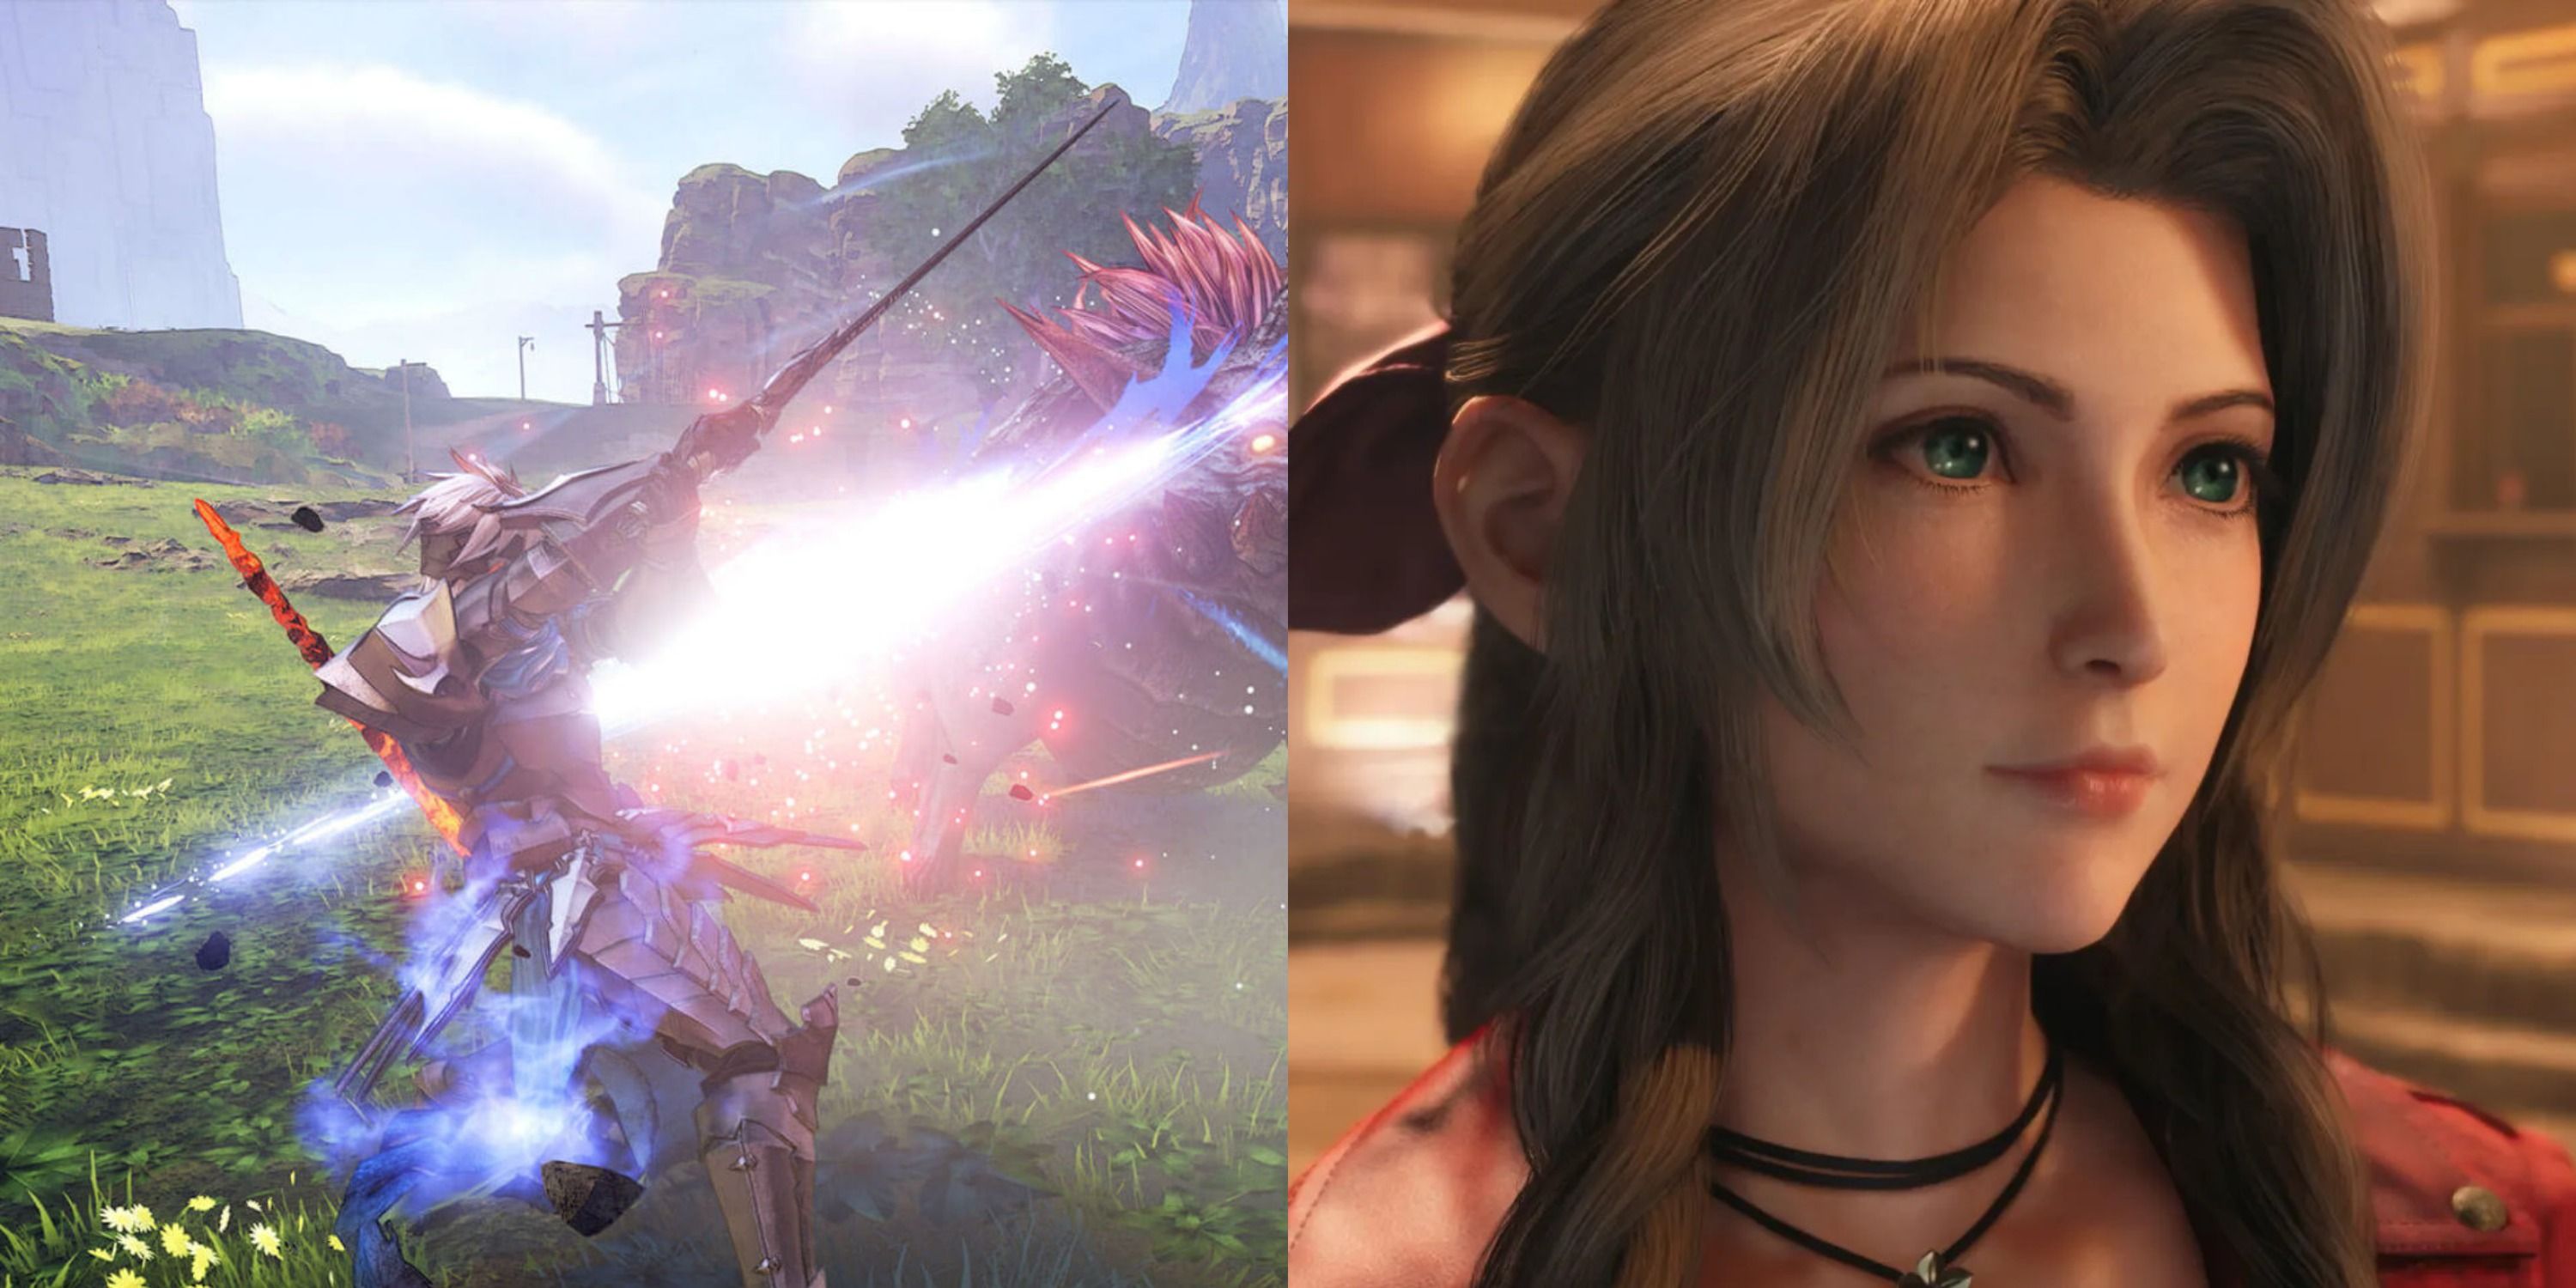 Featured image of combat from Tales of Arise and Aerith from Final Fantasy 7 Remake